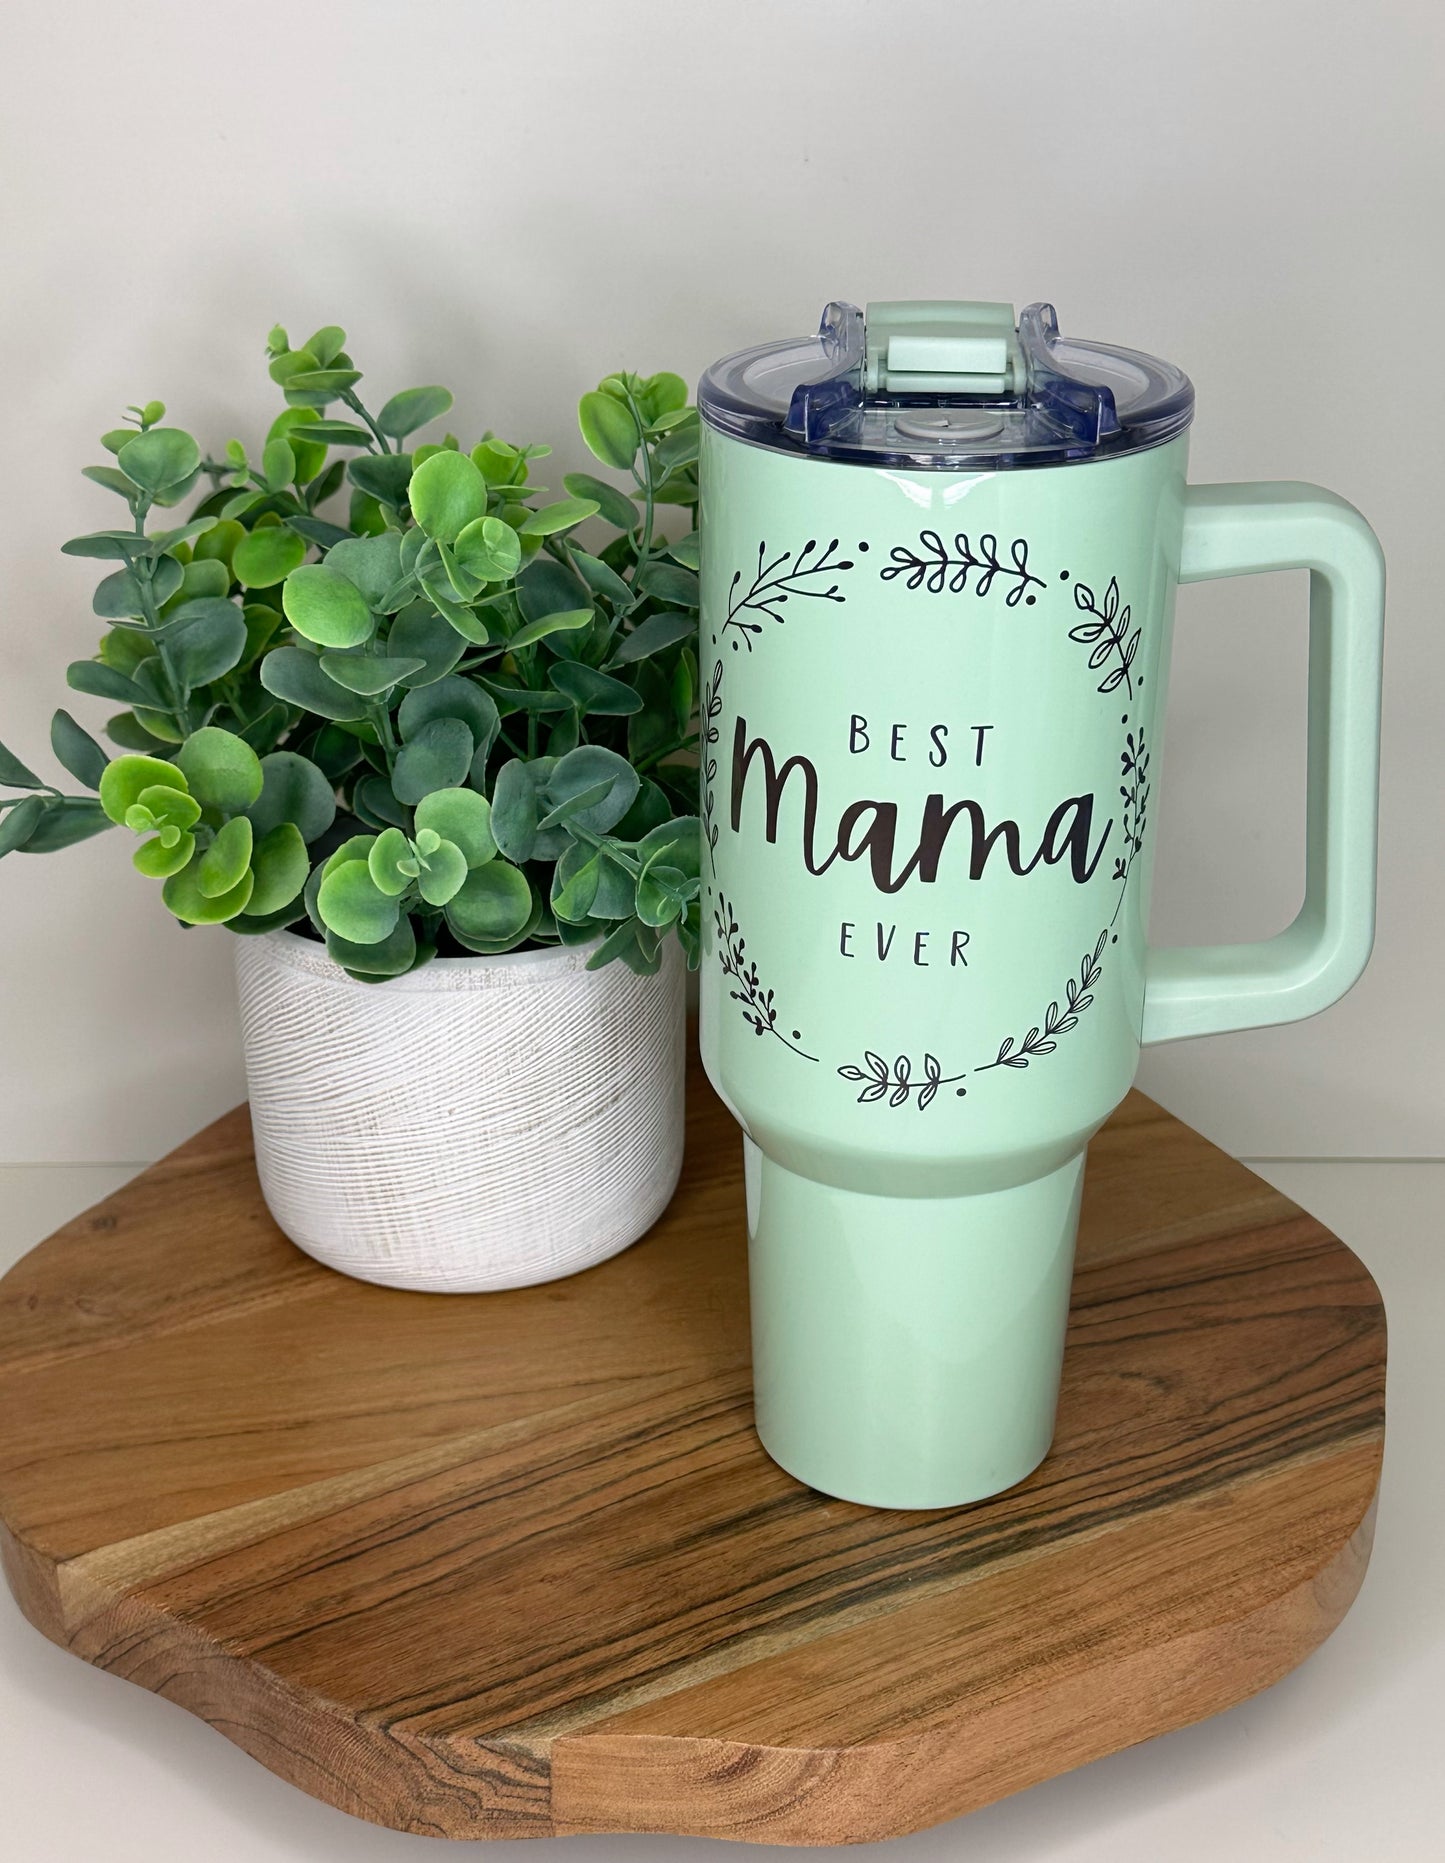 40oz Sublimation Tumbler – Lisas Cups and Creations